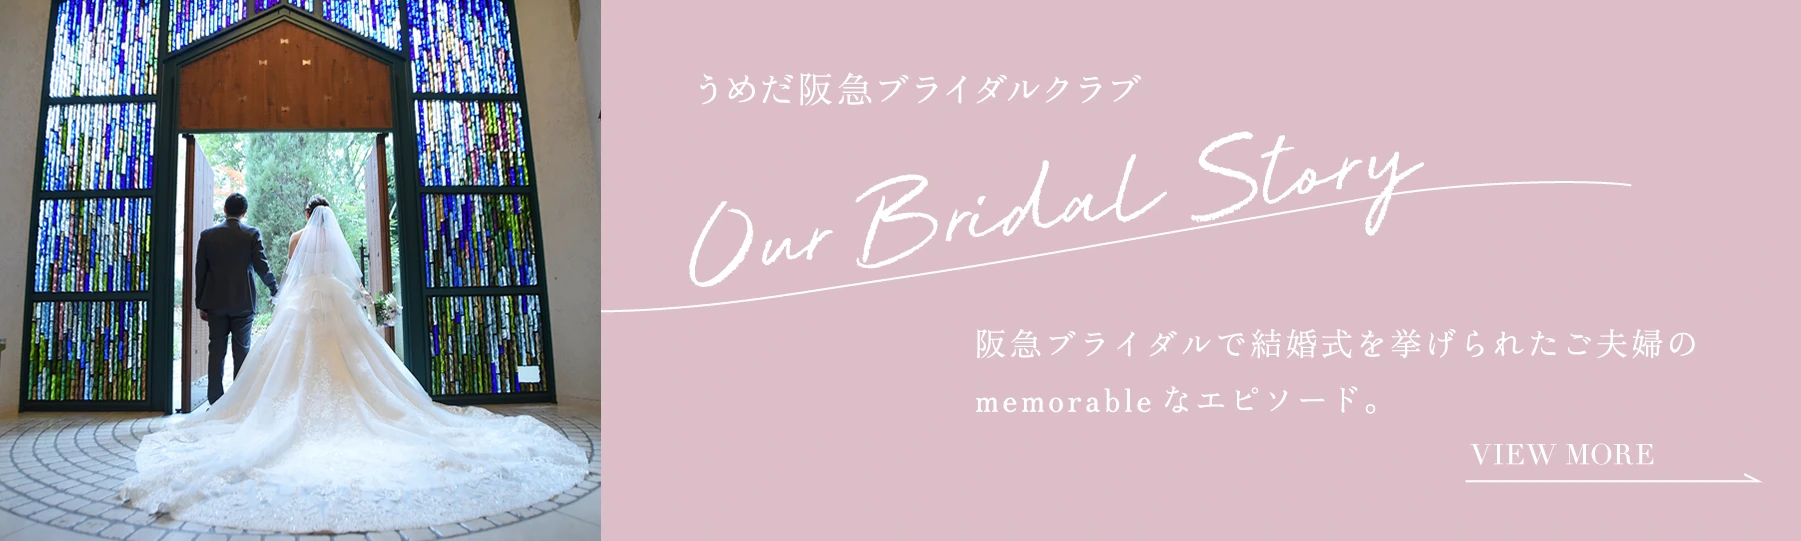 Our Bridal Story